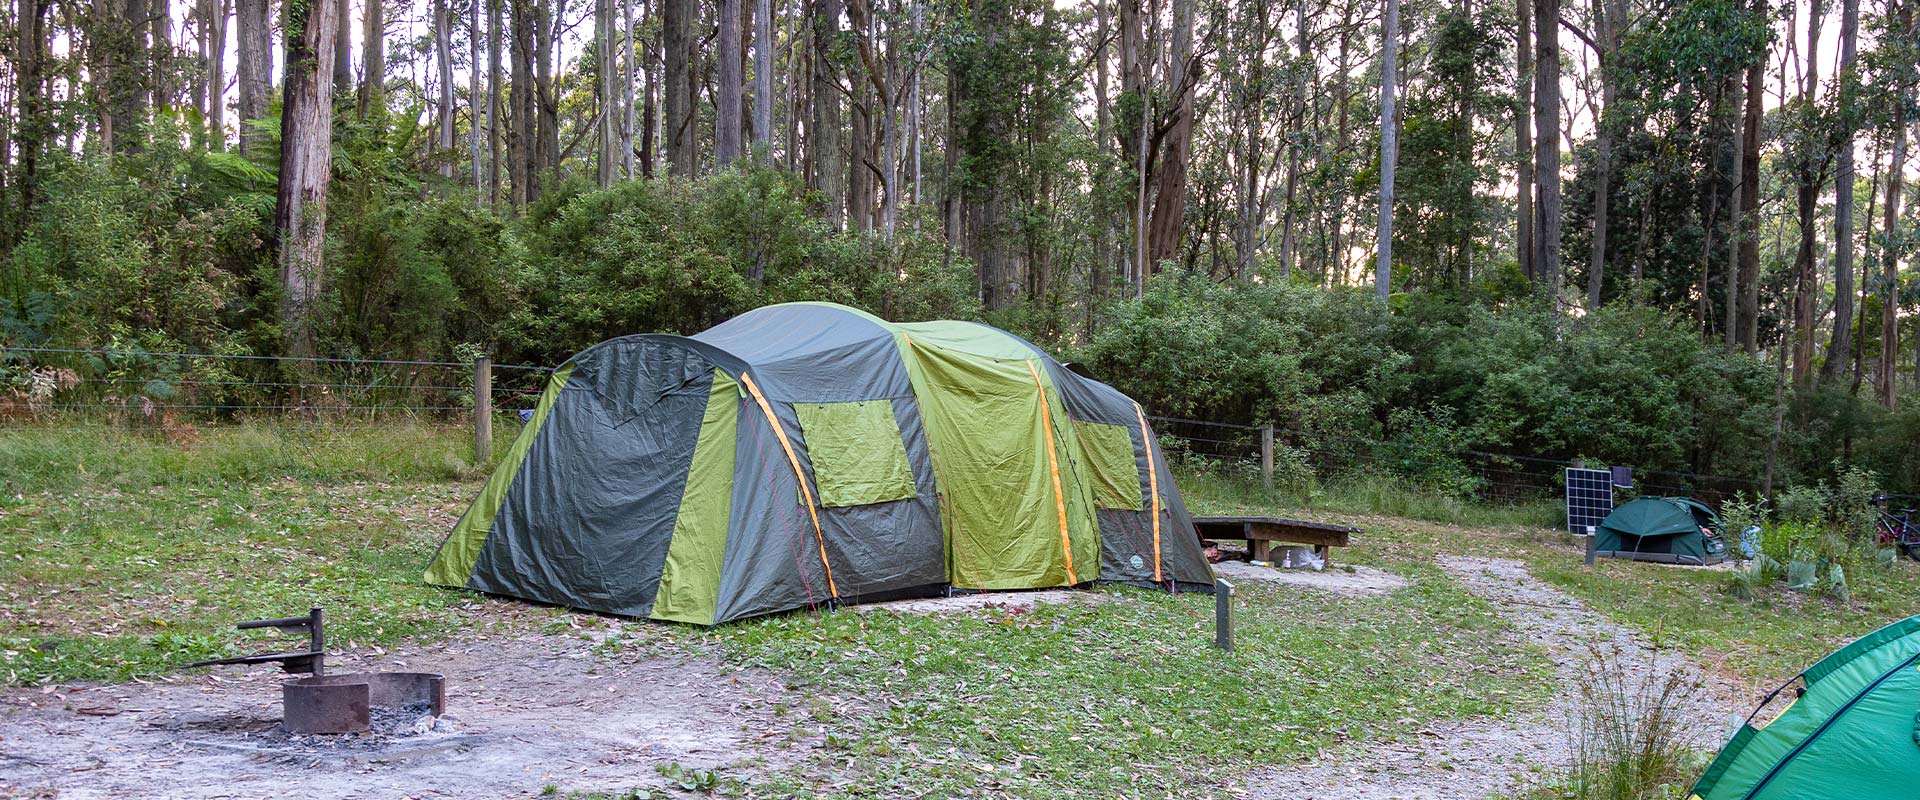 A large green and grey tent setup in a forested clearing in front of tall gum trees